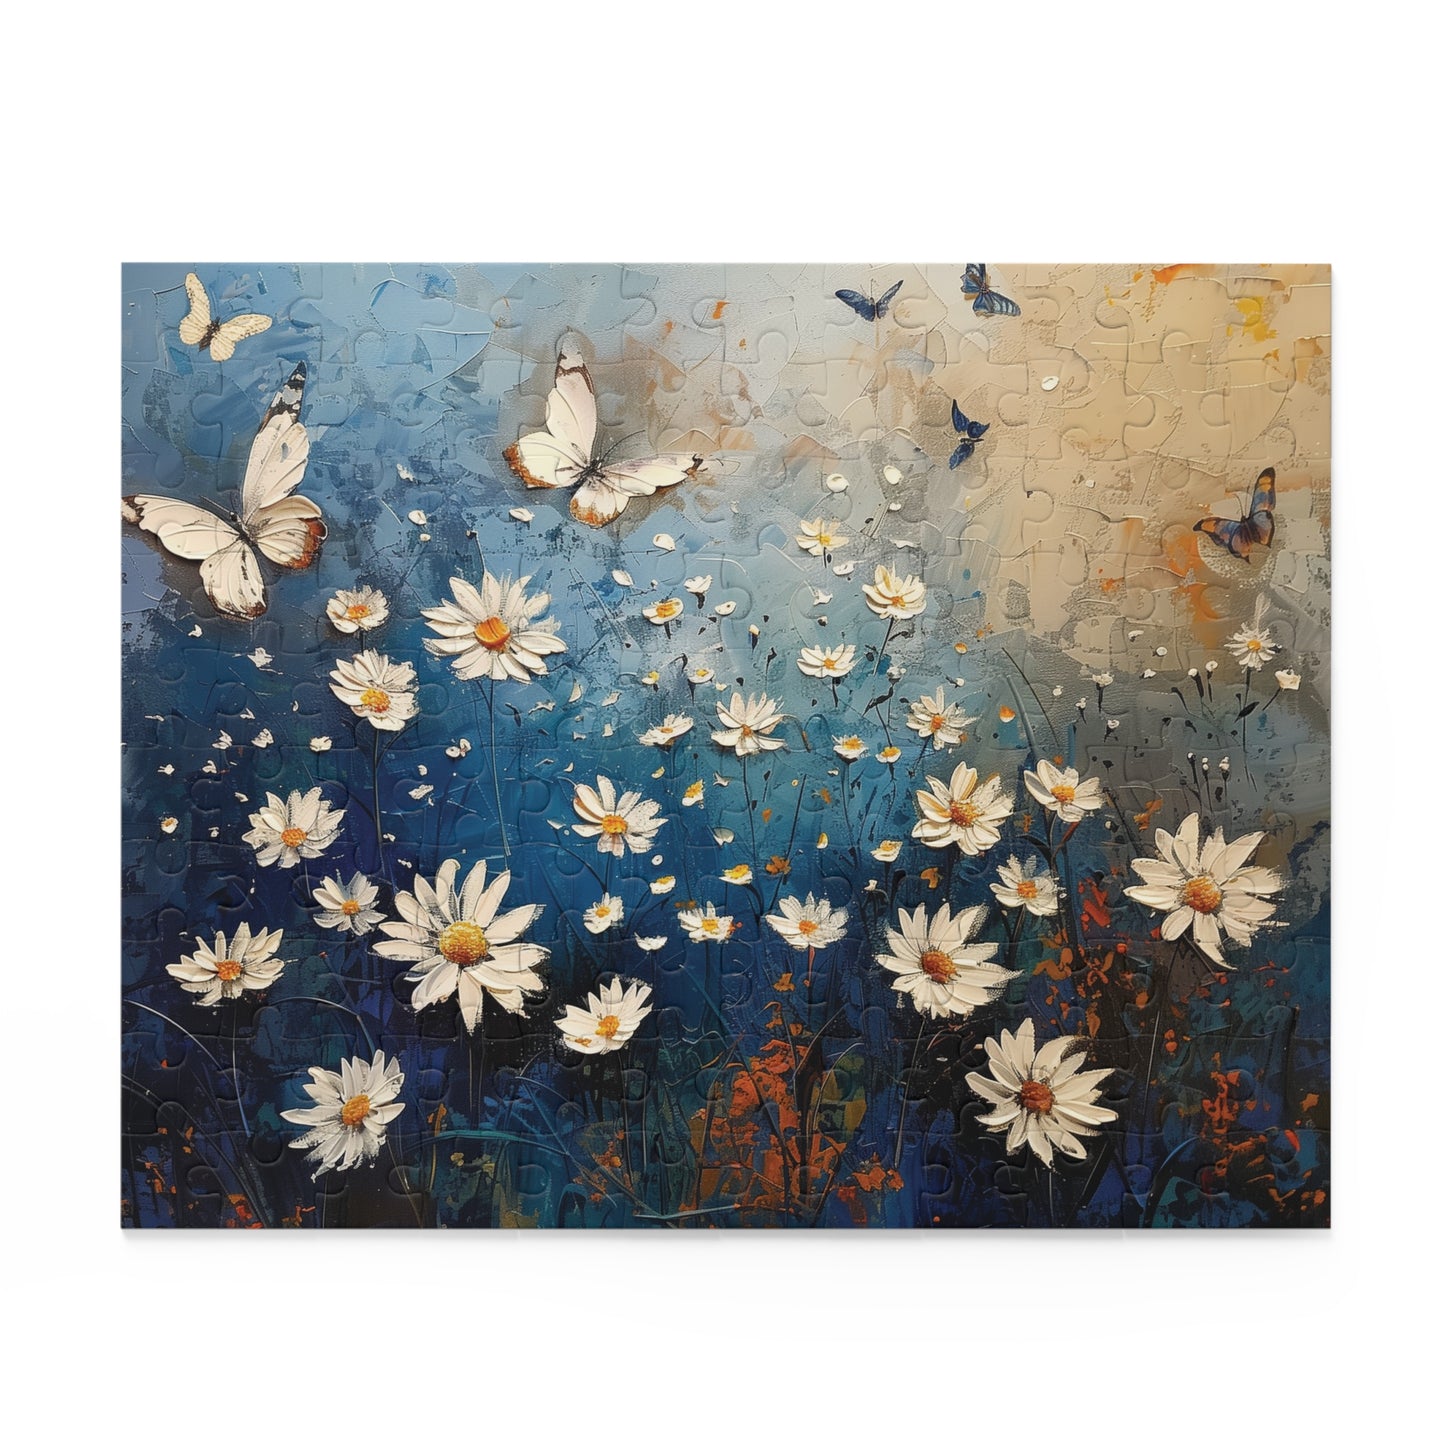 Daisy Flower Puzzle, Butterfly Jigsaw Puzzle, Beautiful Painting Puzzle, Artistic Puzzle, 120 pieces, 252 pieces, 500 pieces, Family Game